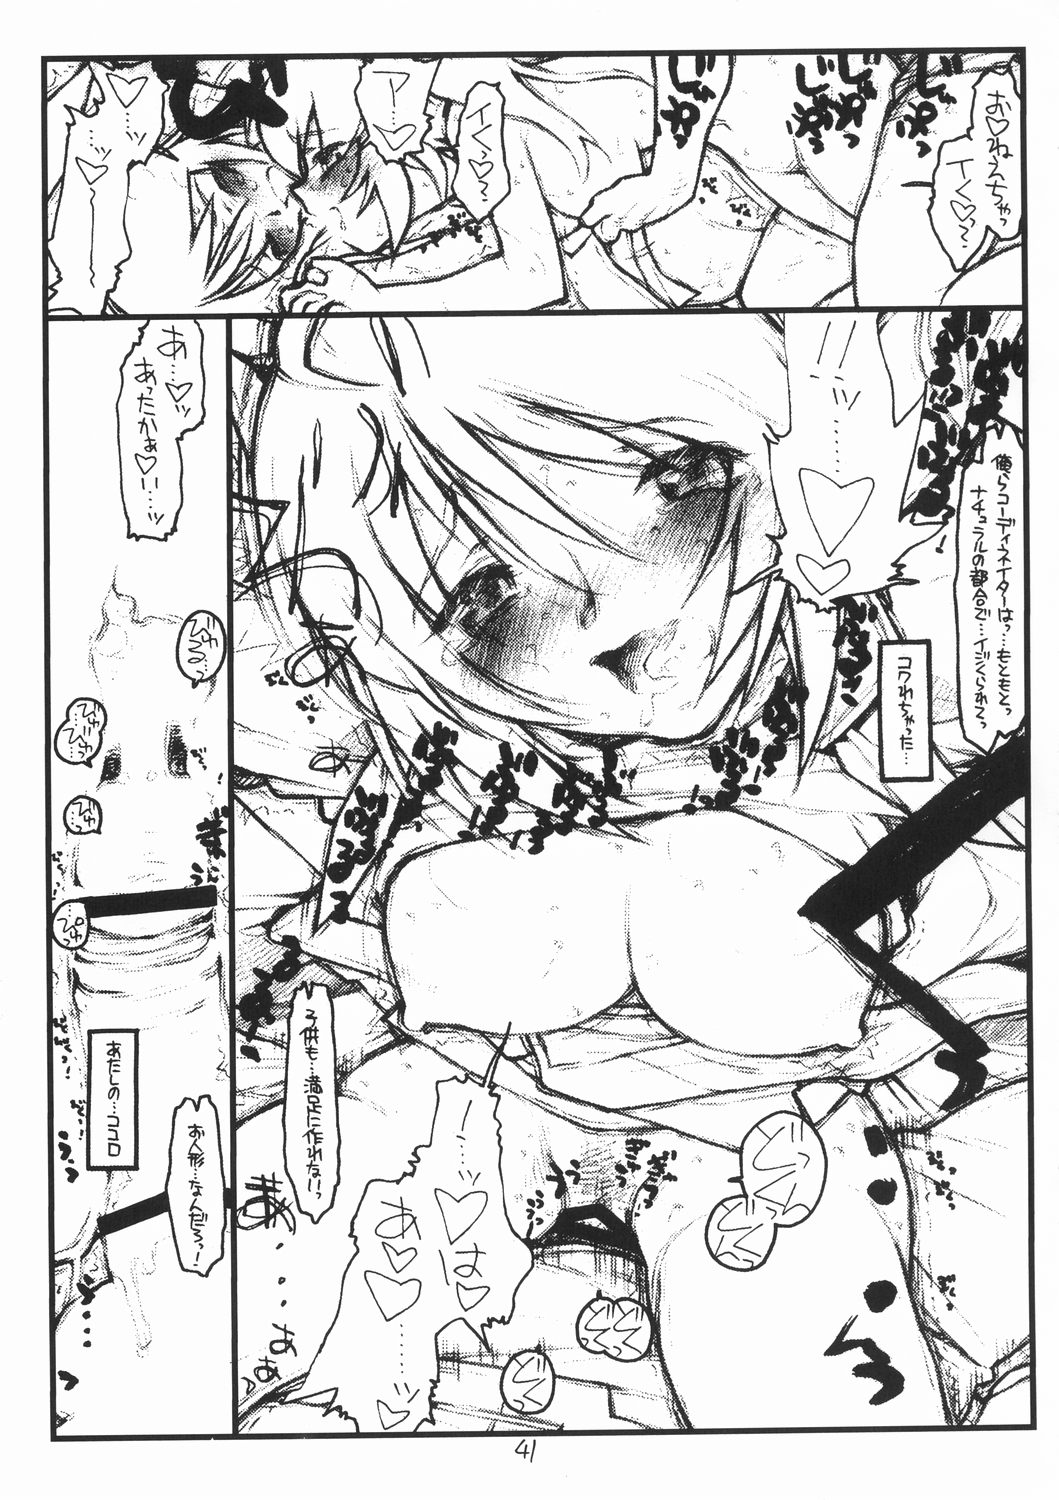 (SC28) [bolze. (rit.)] Miscoordination. (Mobile Suit Gundam SEED DESTINY) page 40 full